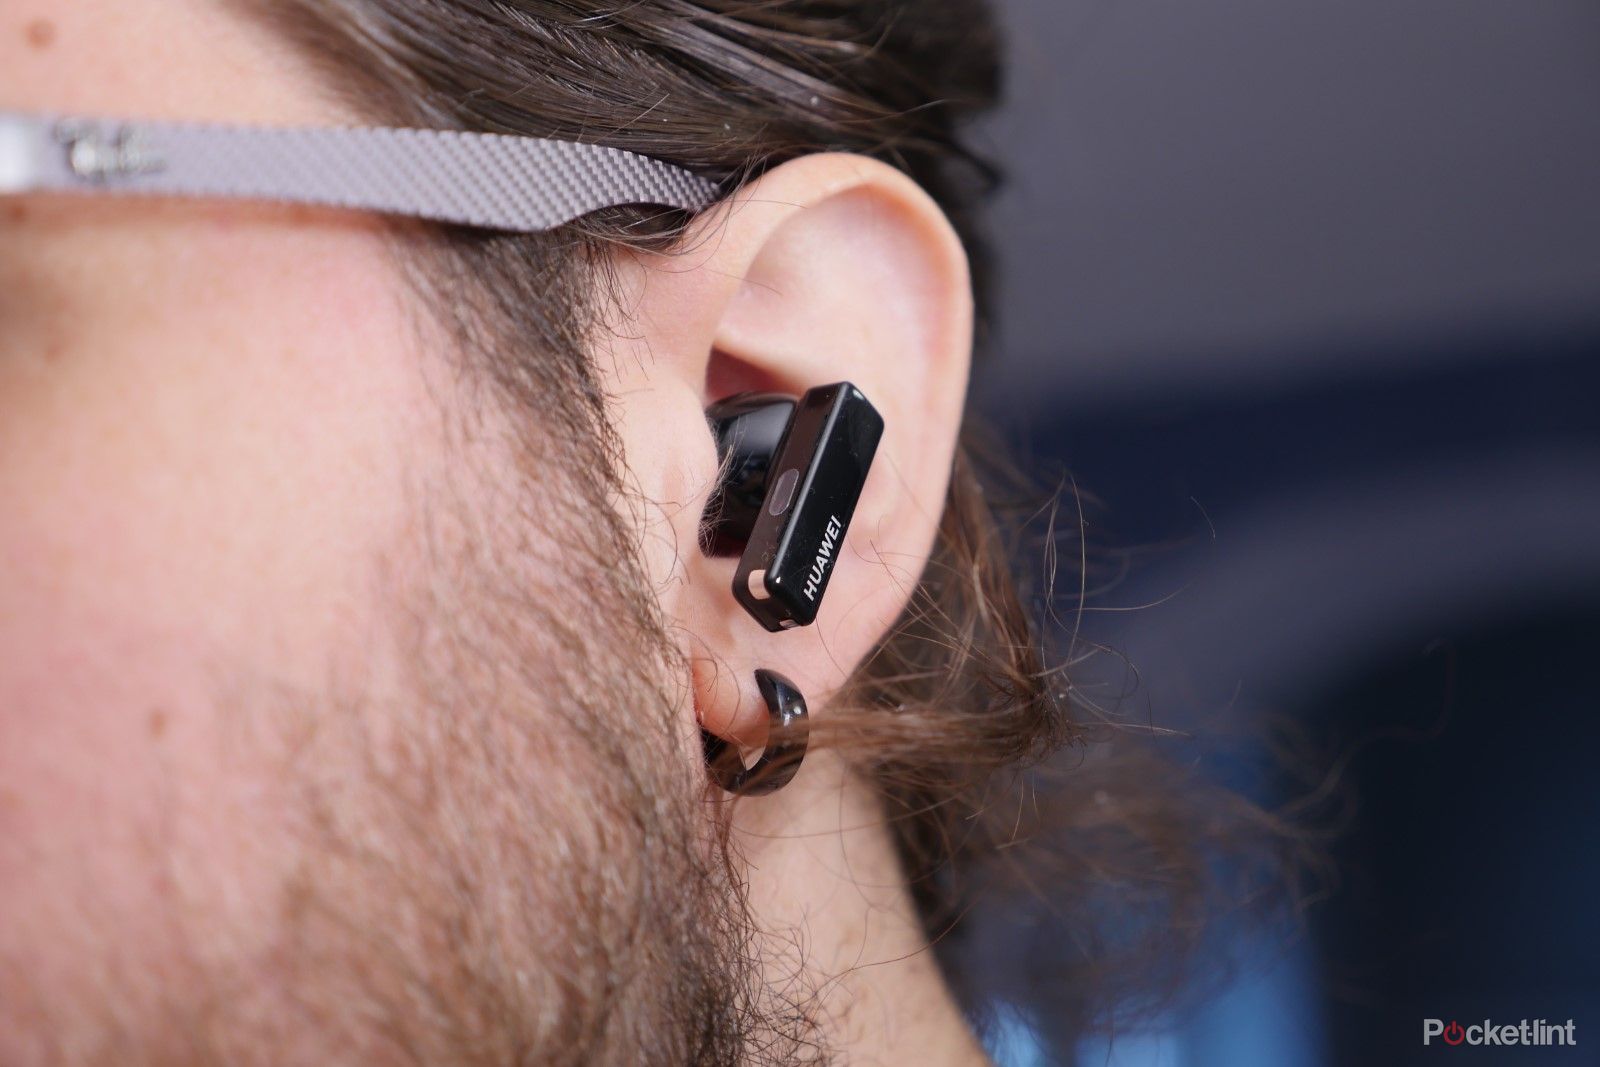 Huawei Freebuds Pro initial review: Convenient ANC true wireless earbuds photo 1